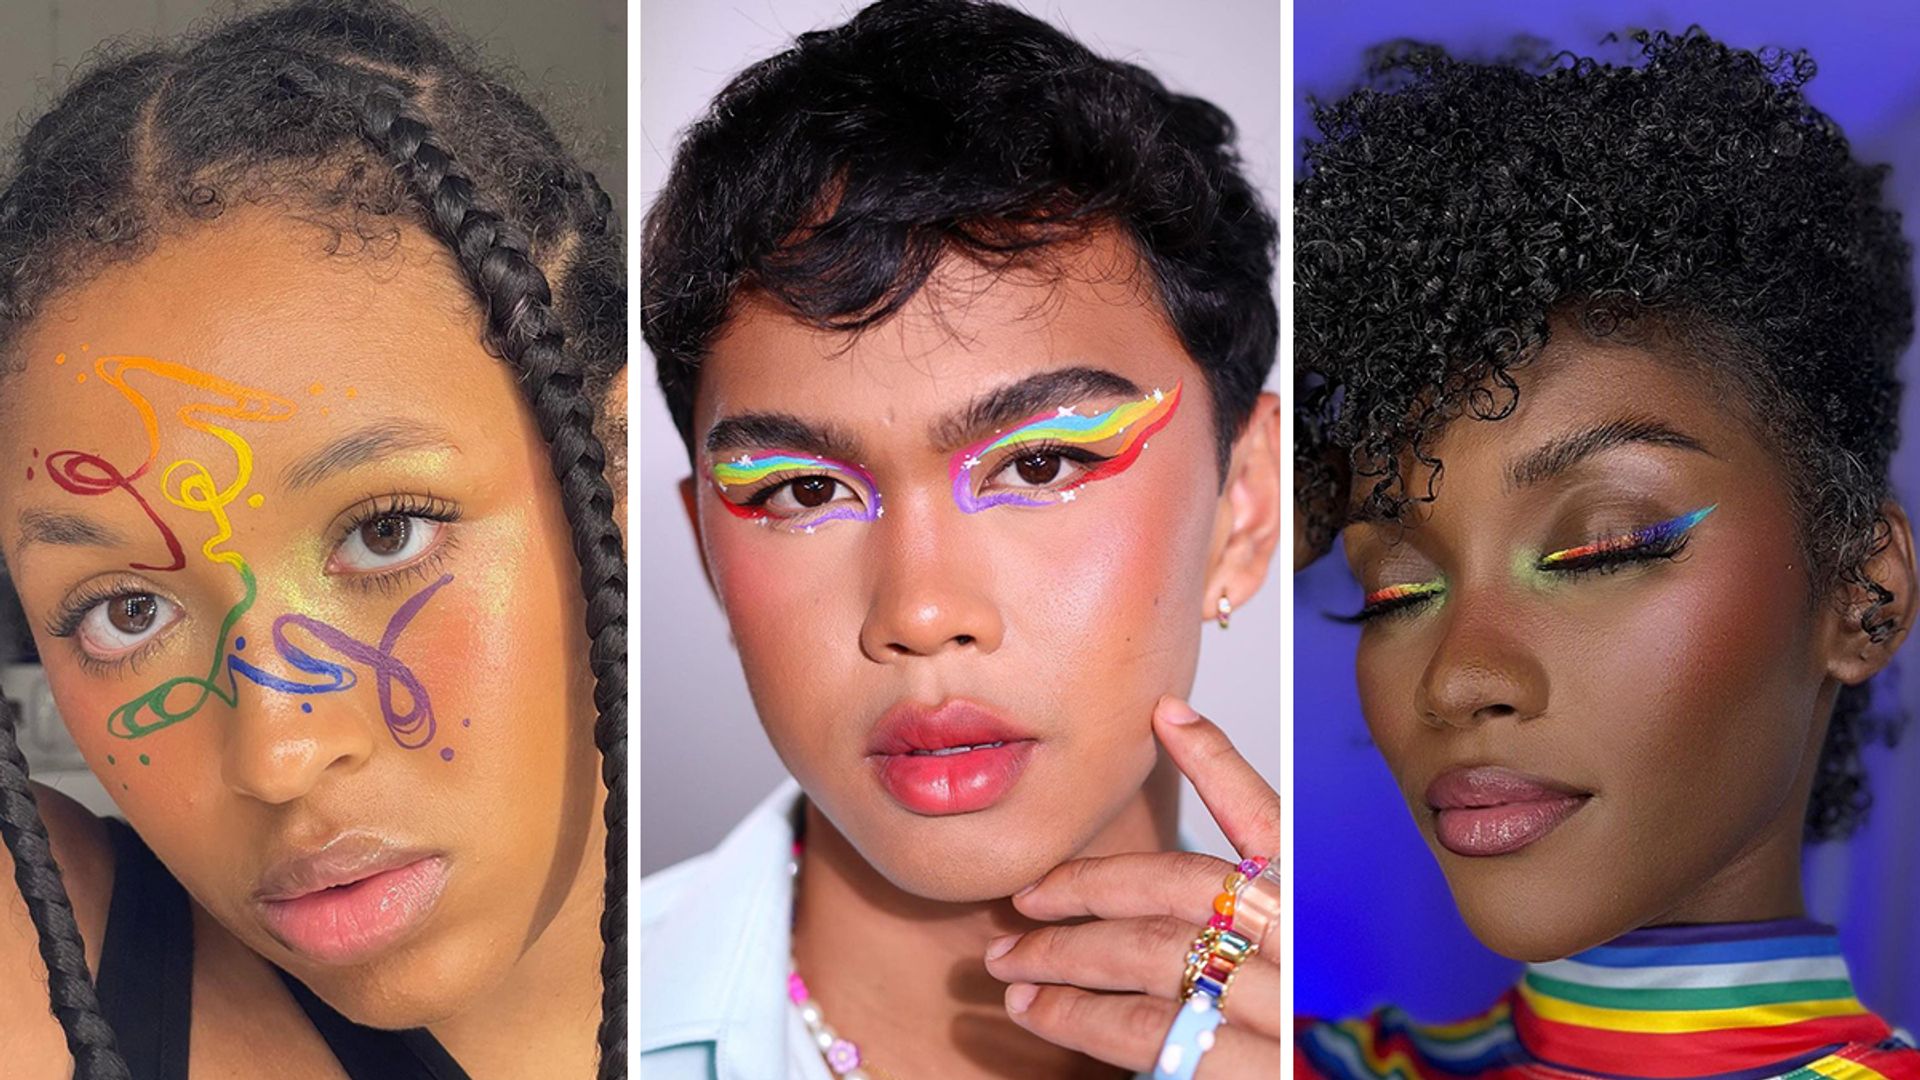 10 amazing Pride makeup ideas - inspired by Instagram